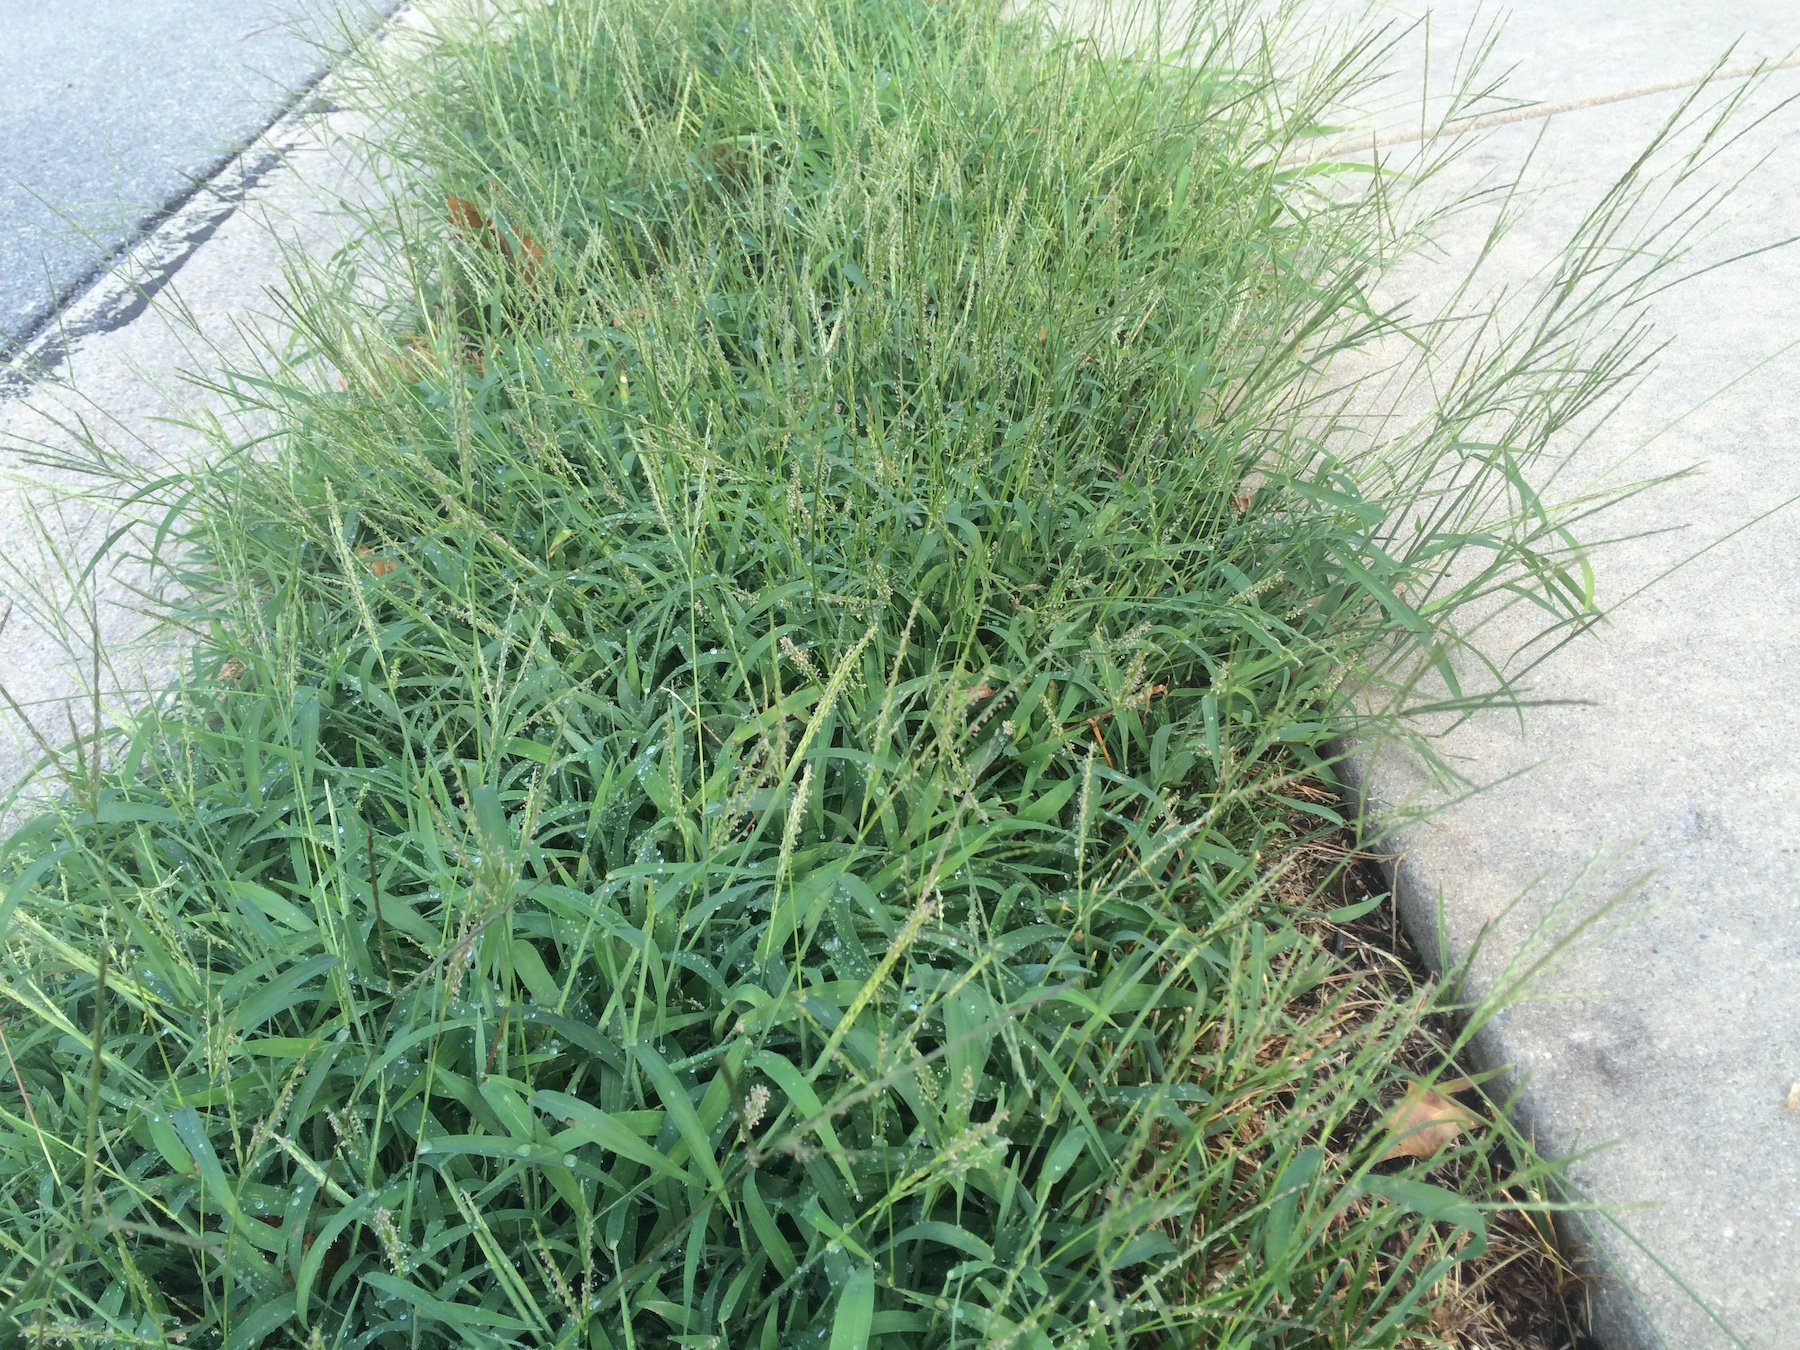 Crabgrass with seedheads in an area of lawn